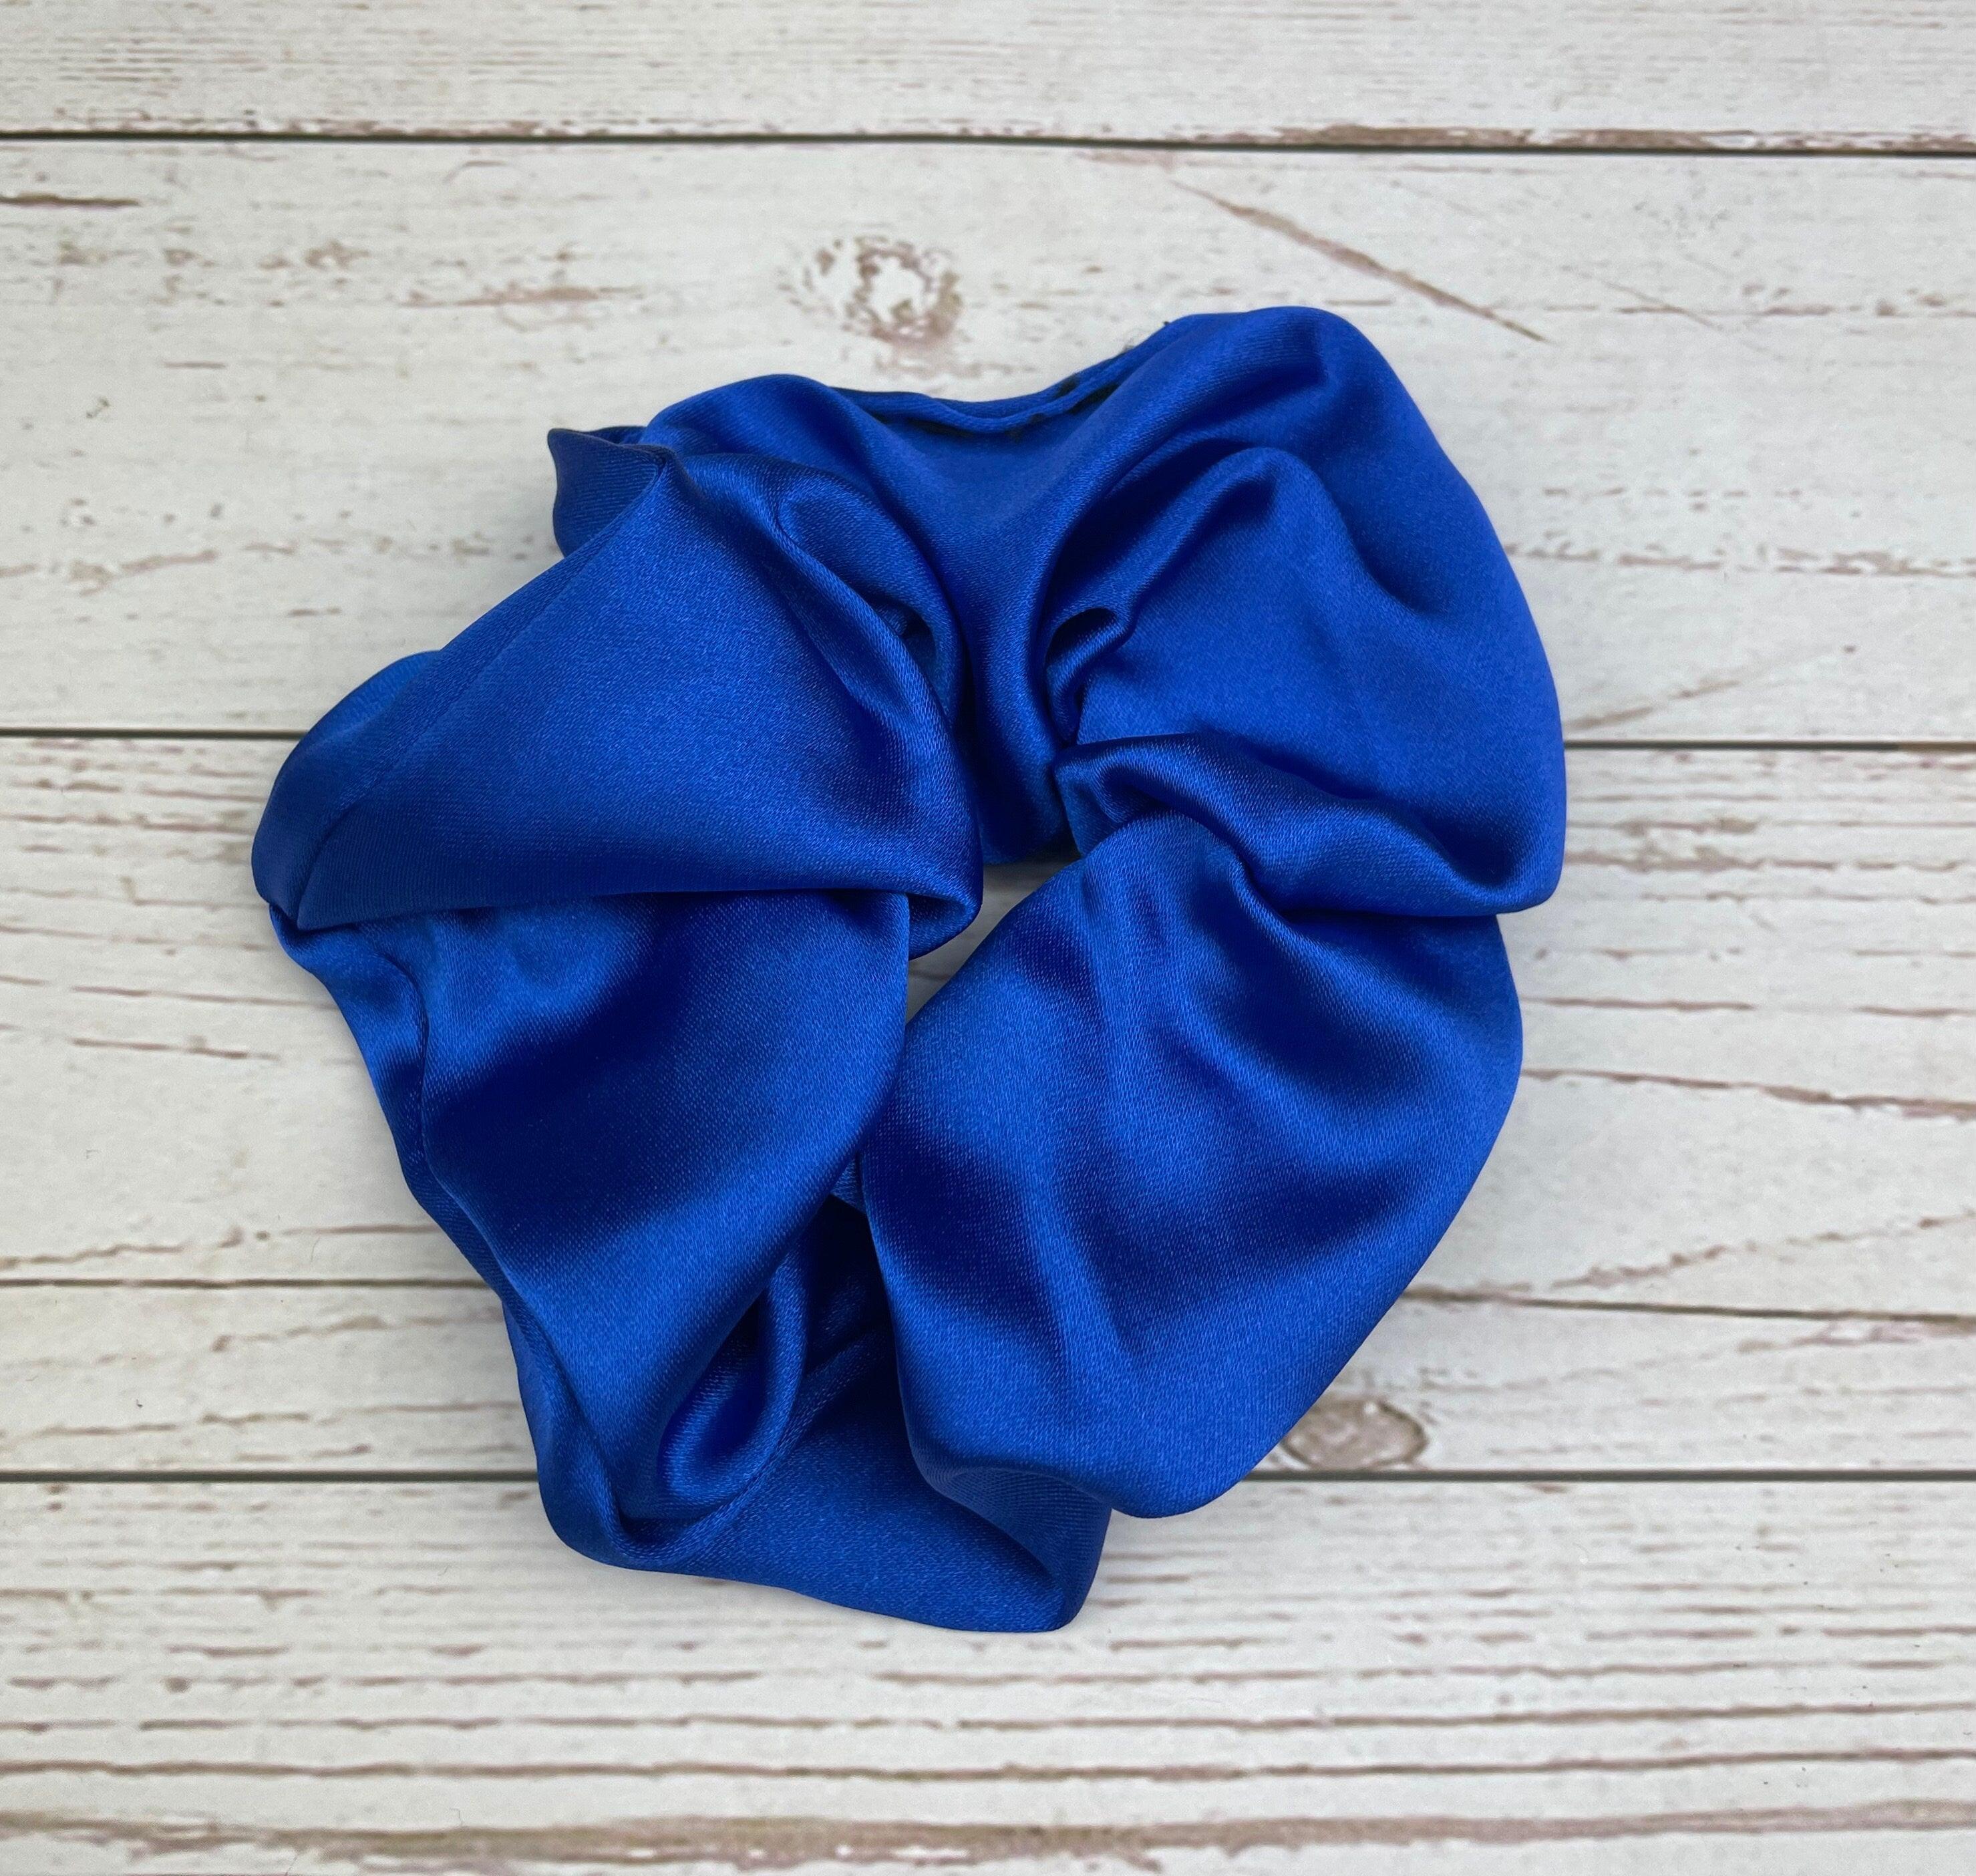 Beautiful Handmade Satin Scrunchie with Bow, Colorful Hair Accessory in Parliament Blue, Purple, Dark Blue, Green and Fuchsia, Hair Ties Scrunchies available at Moyoni Design